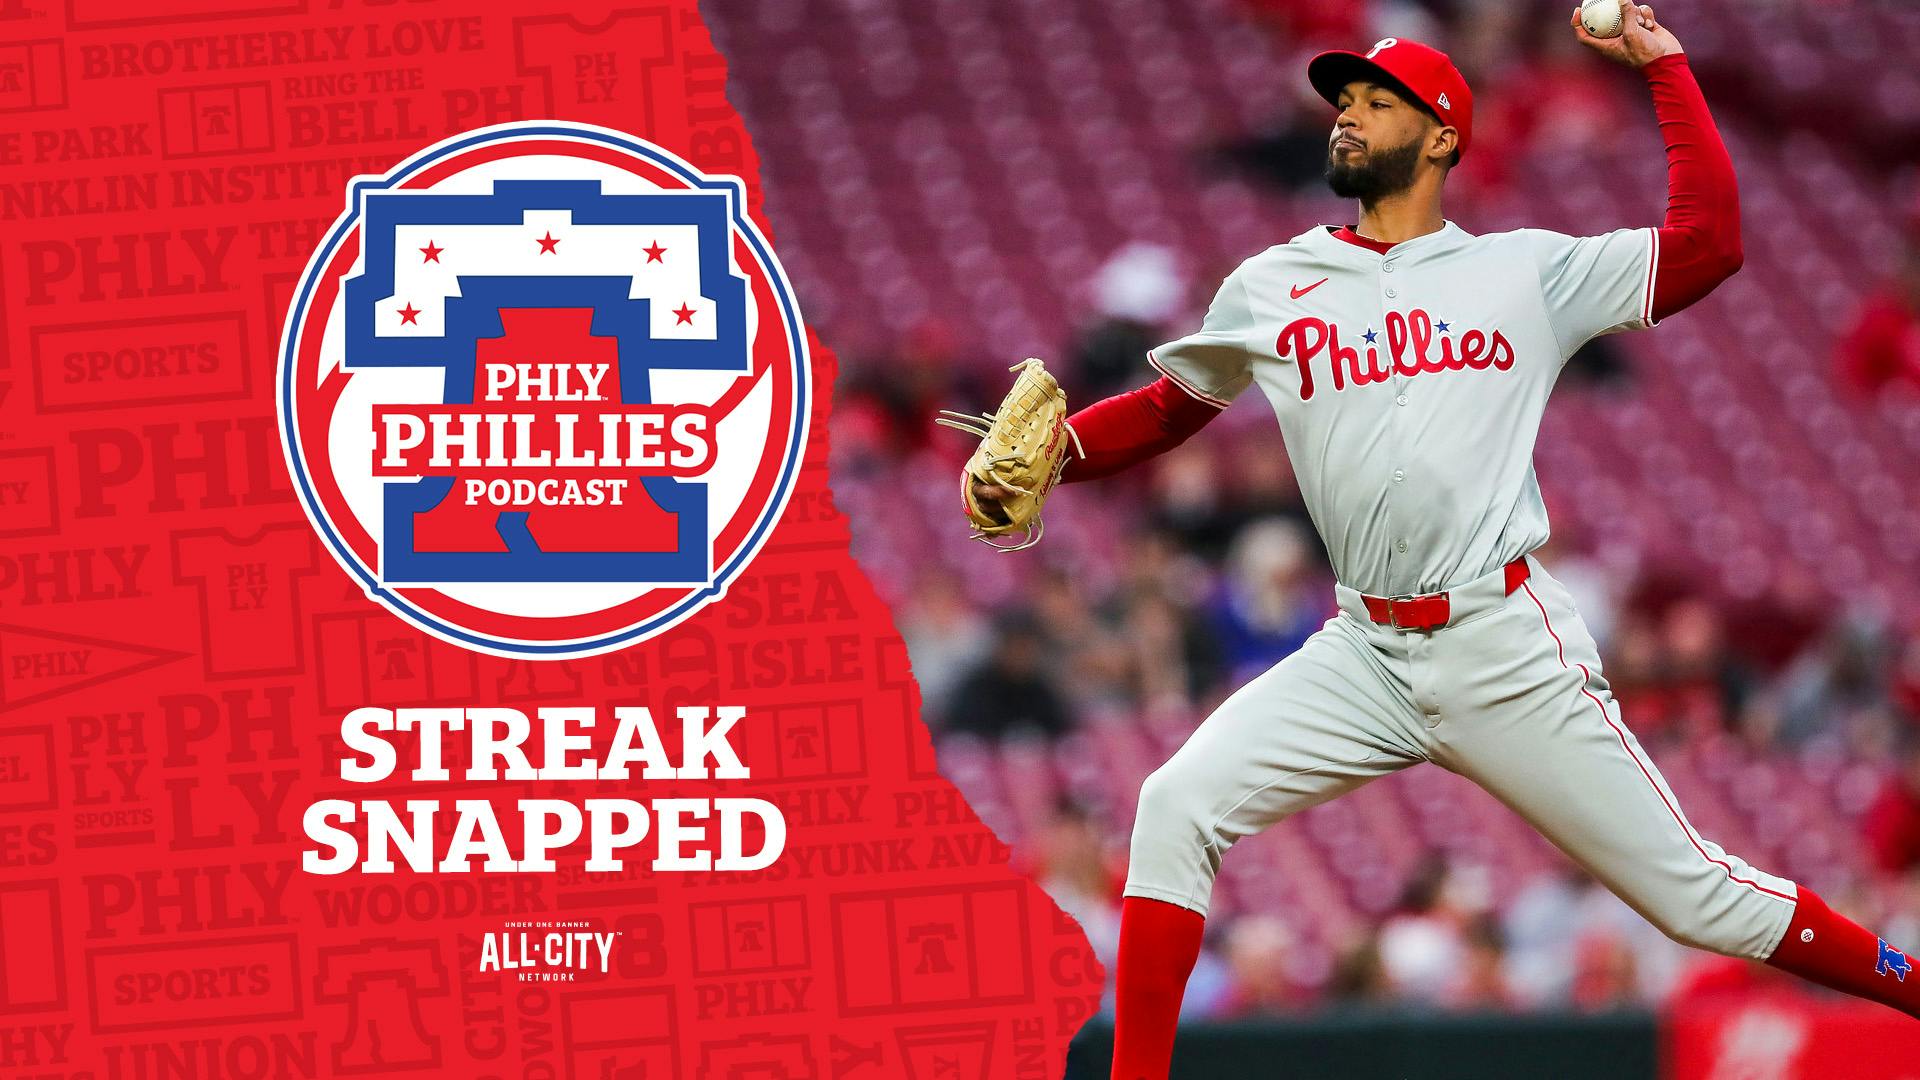 PHLY Phillies Podcast | Cristopher Sanchez, Phillies go cold in loss to Reds | Is game 3 Spencer Turnbull’s last start?